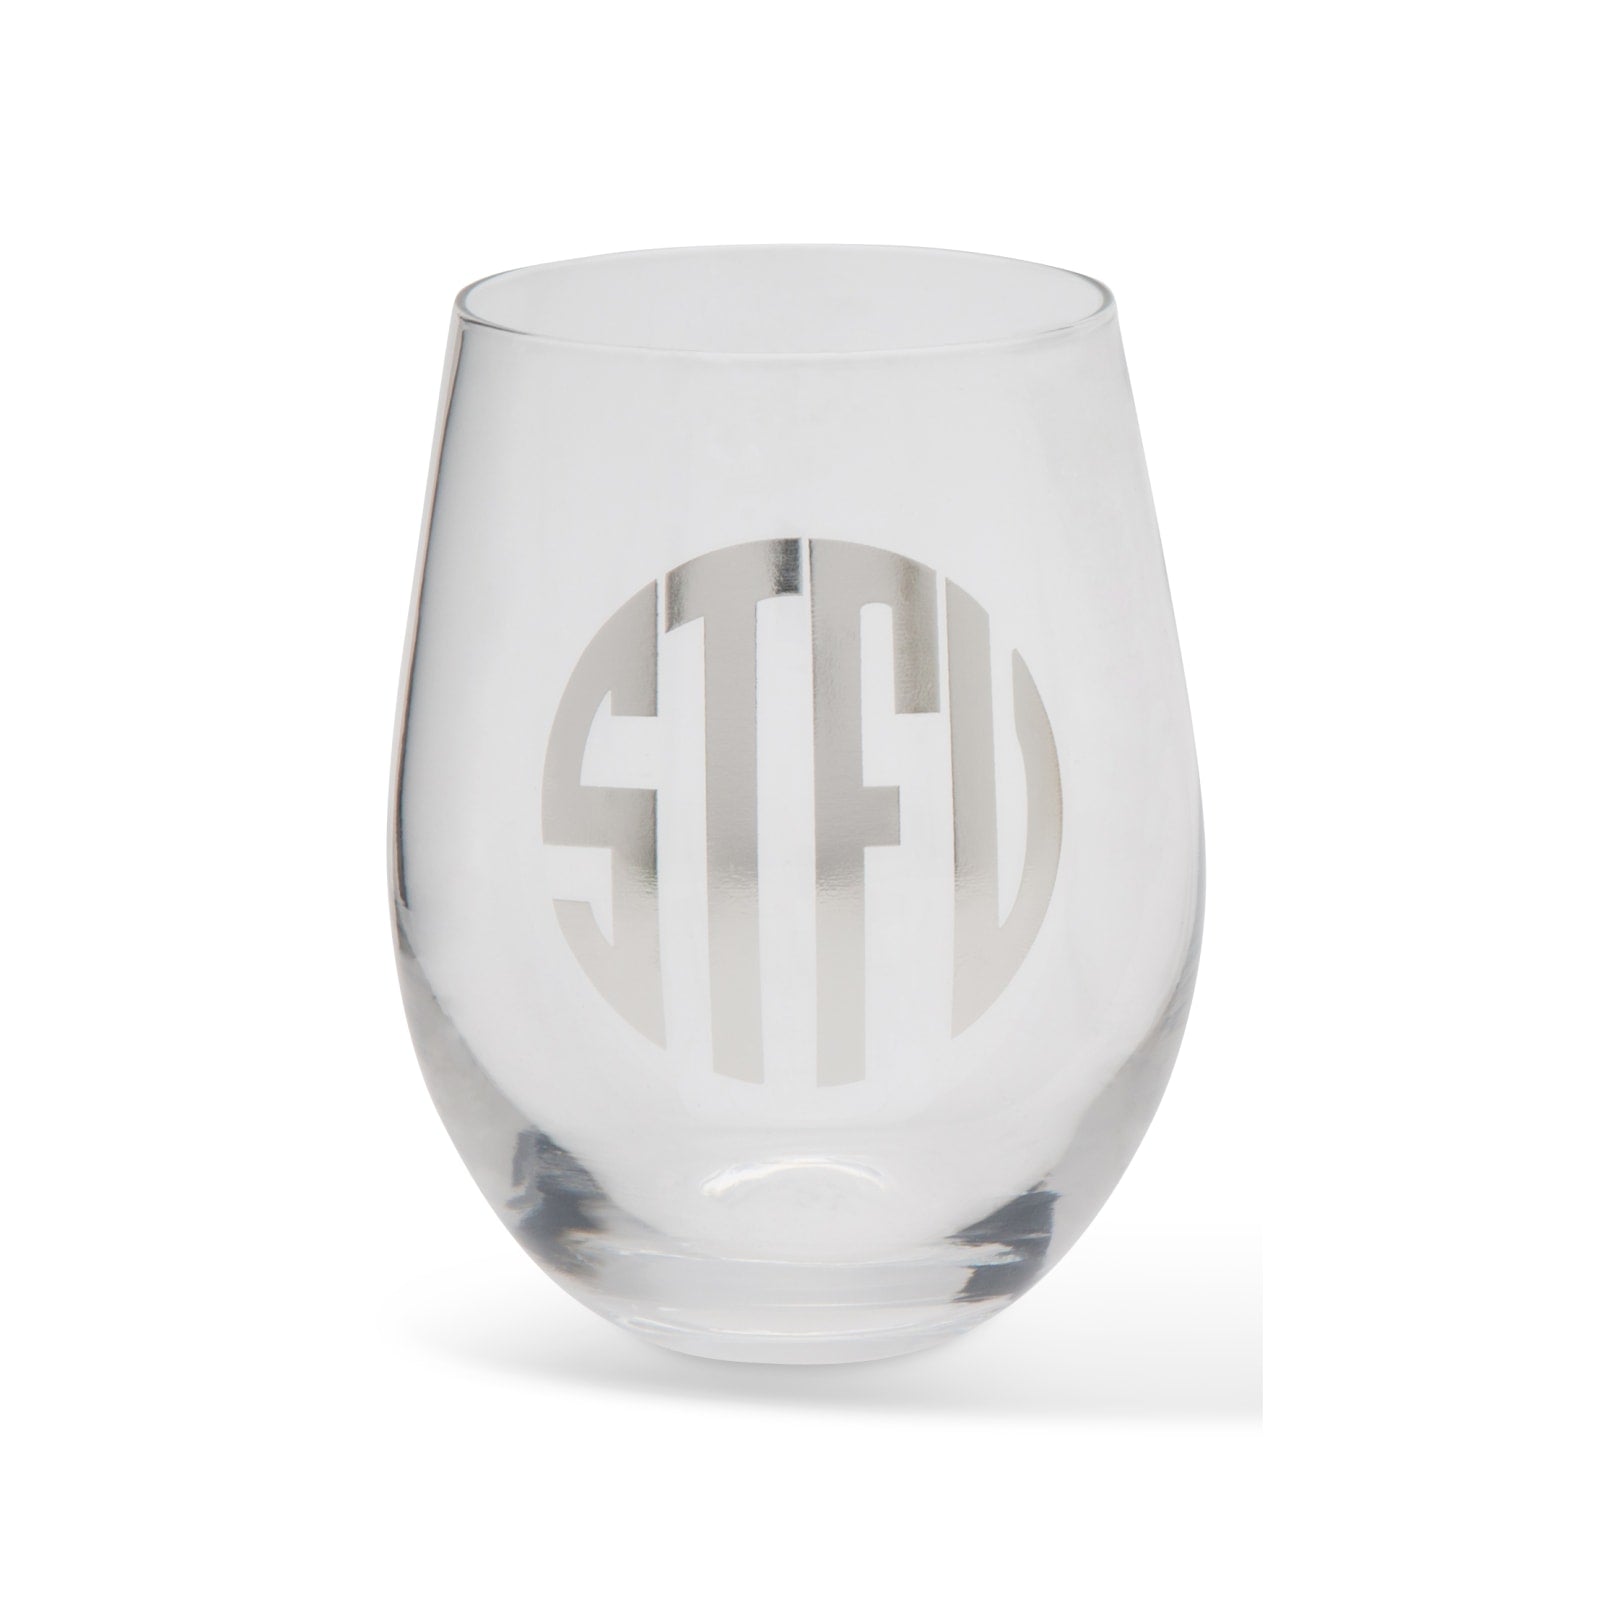 "What the....." Monogrammed Wine Glasses